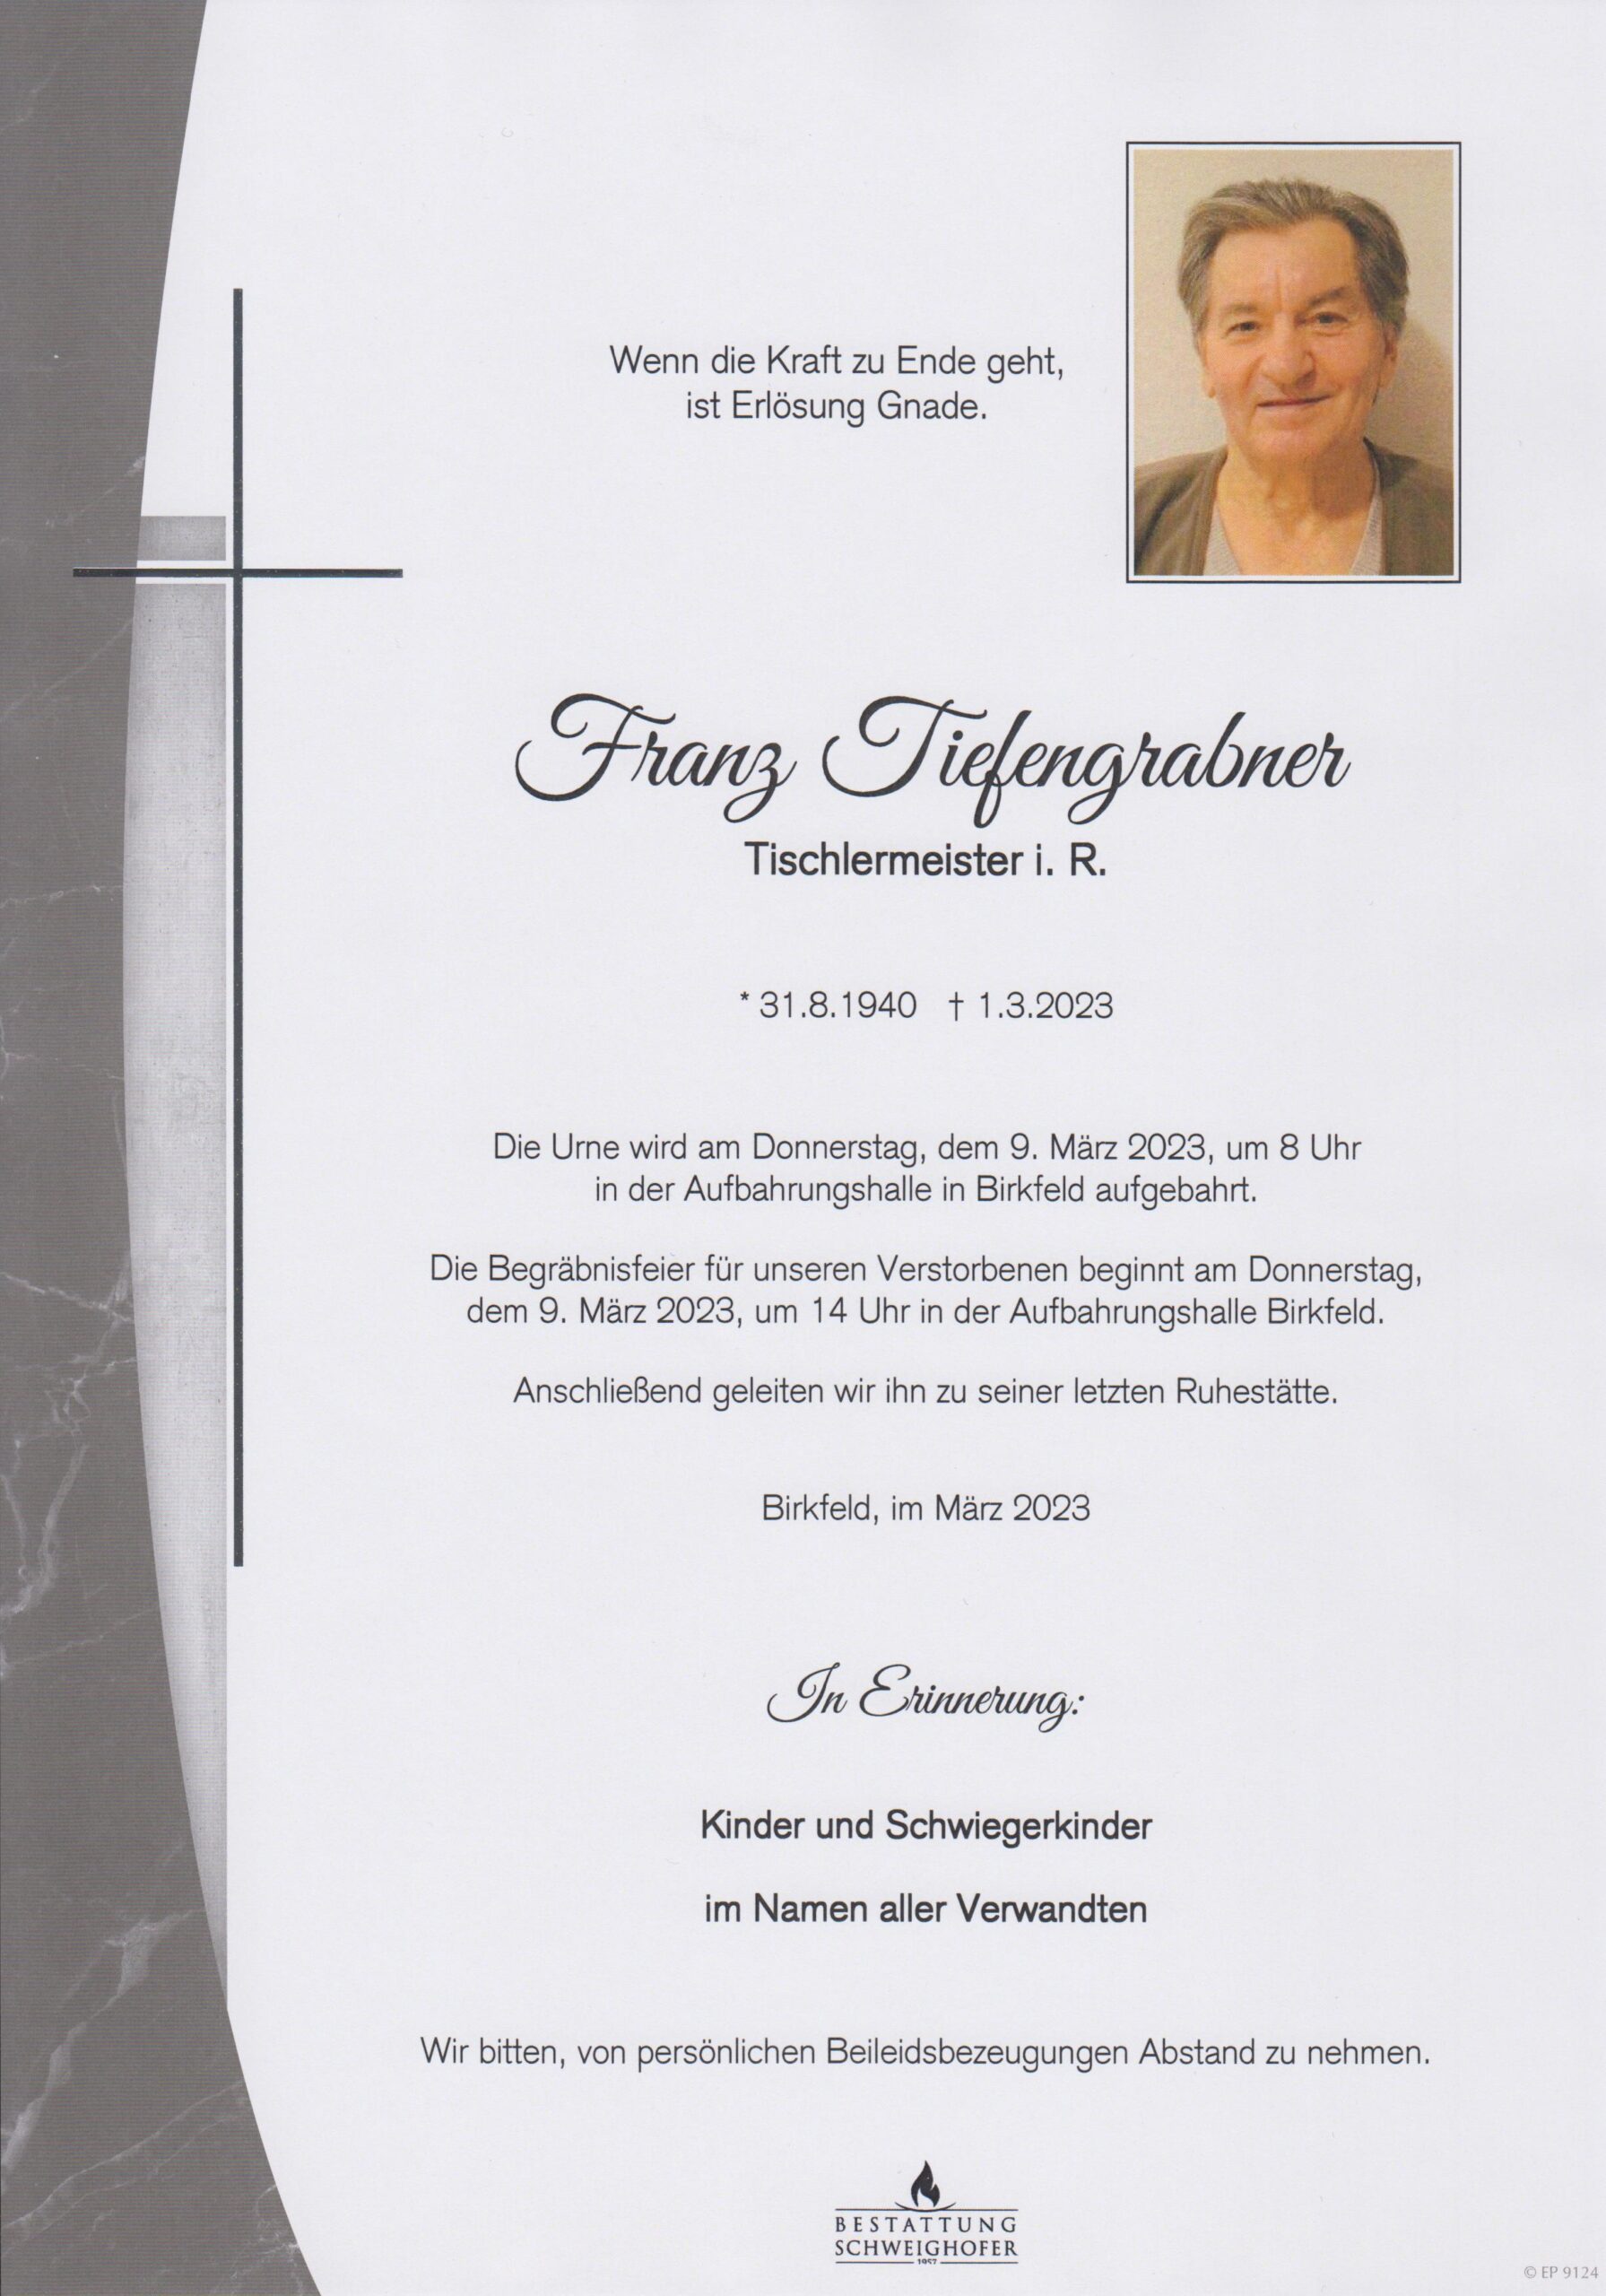 You are currently viewing Franz Tiefengrabner